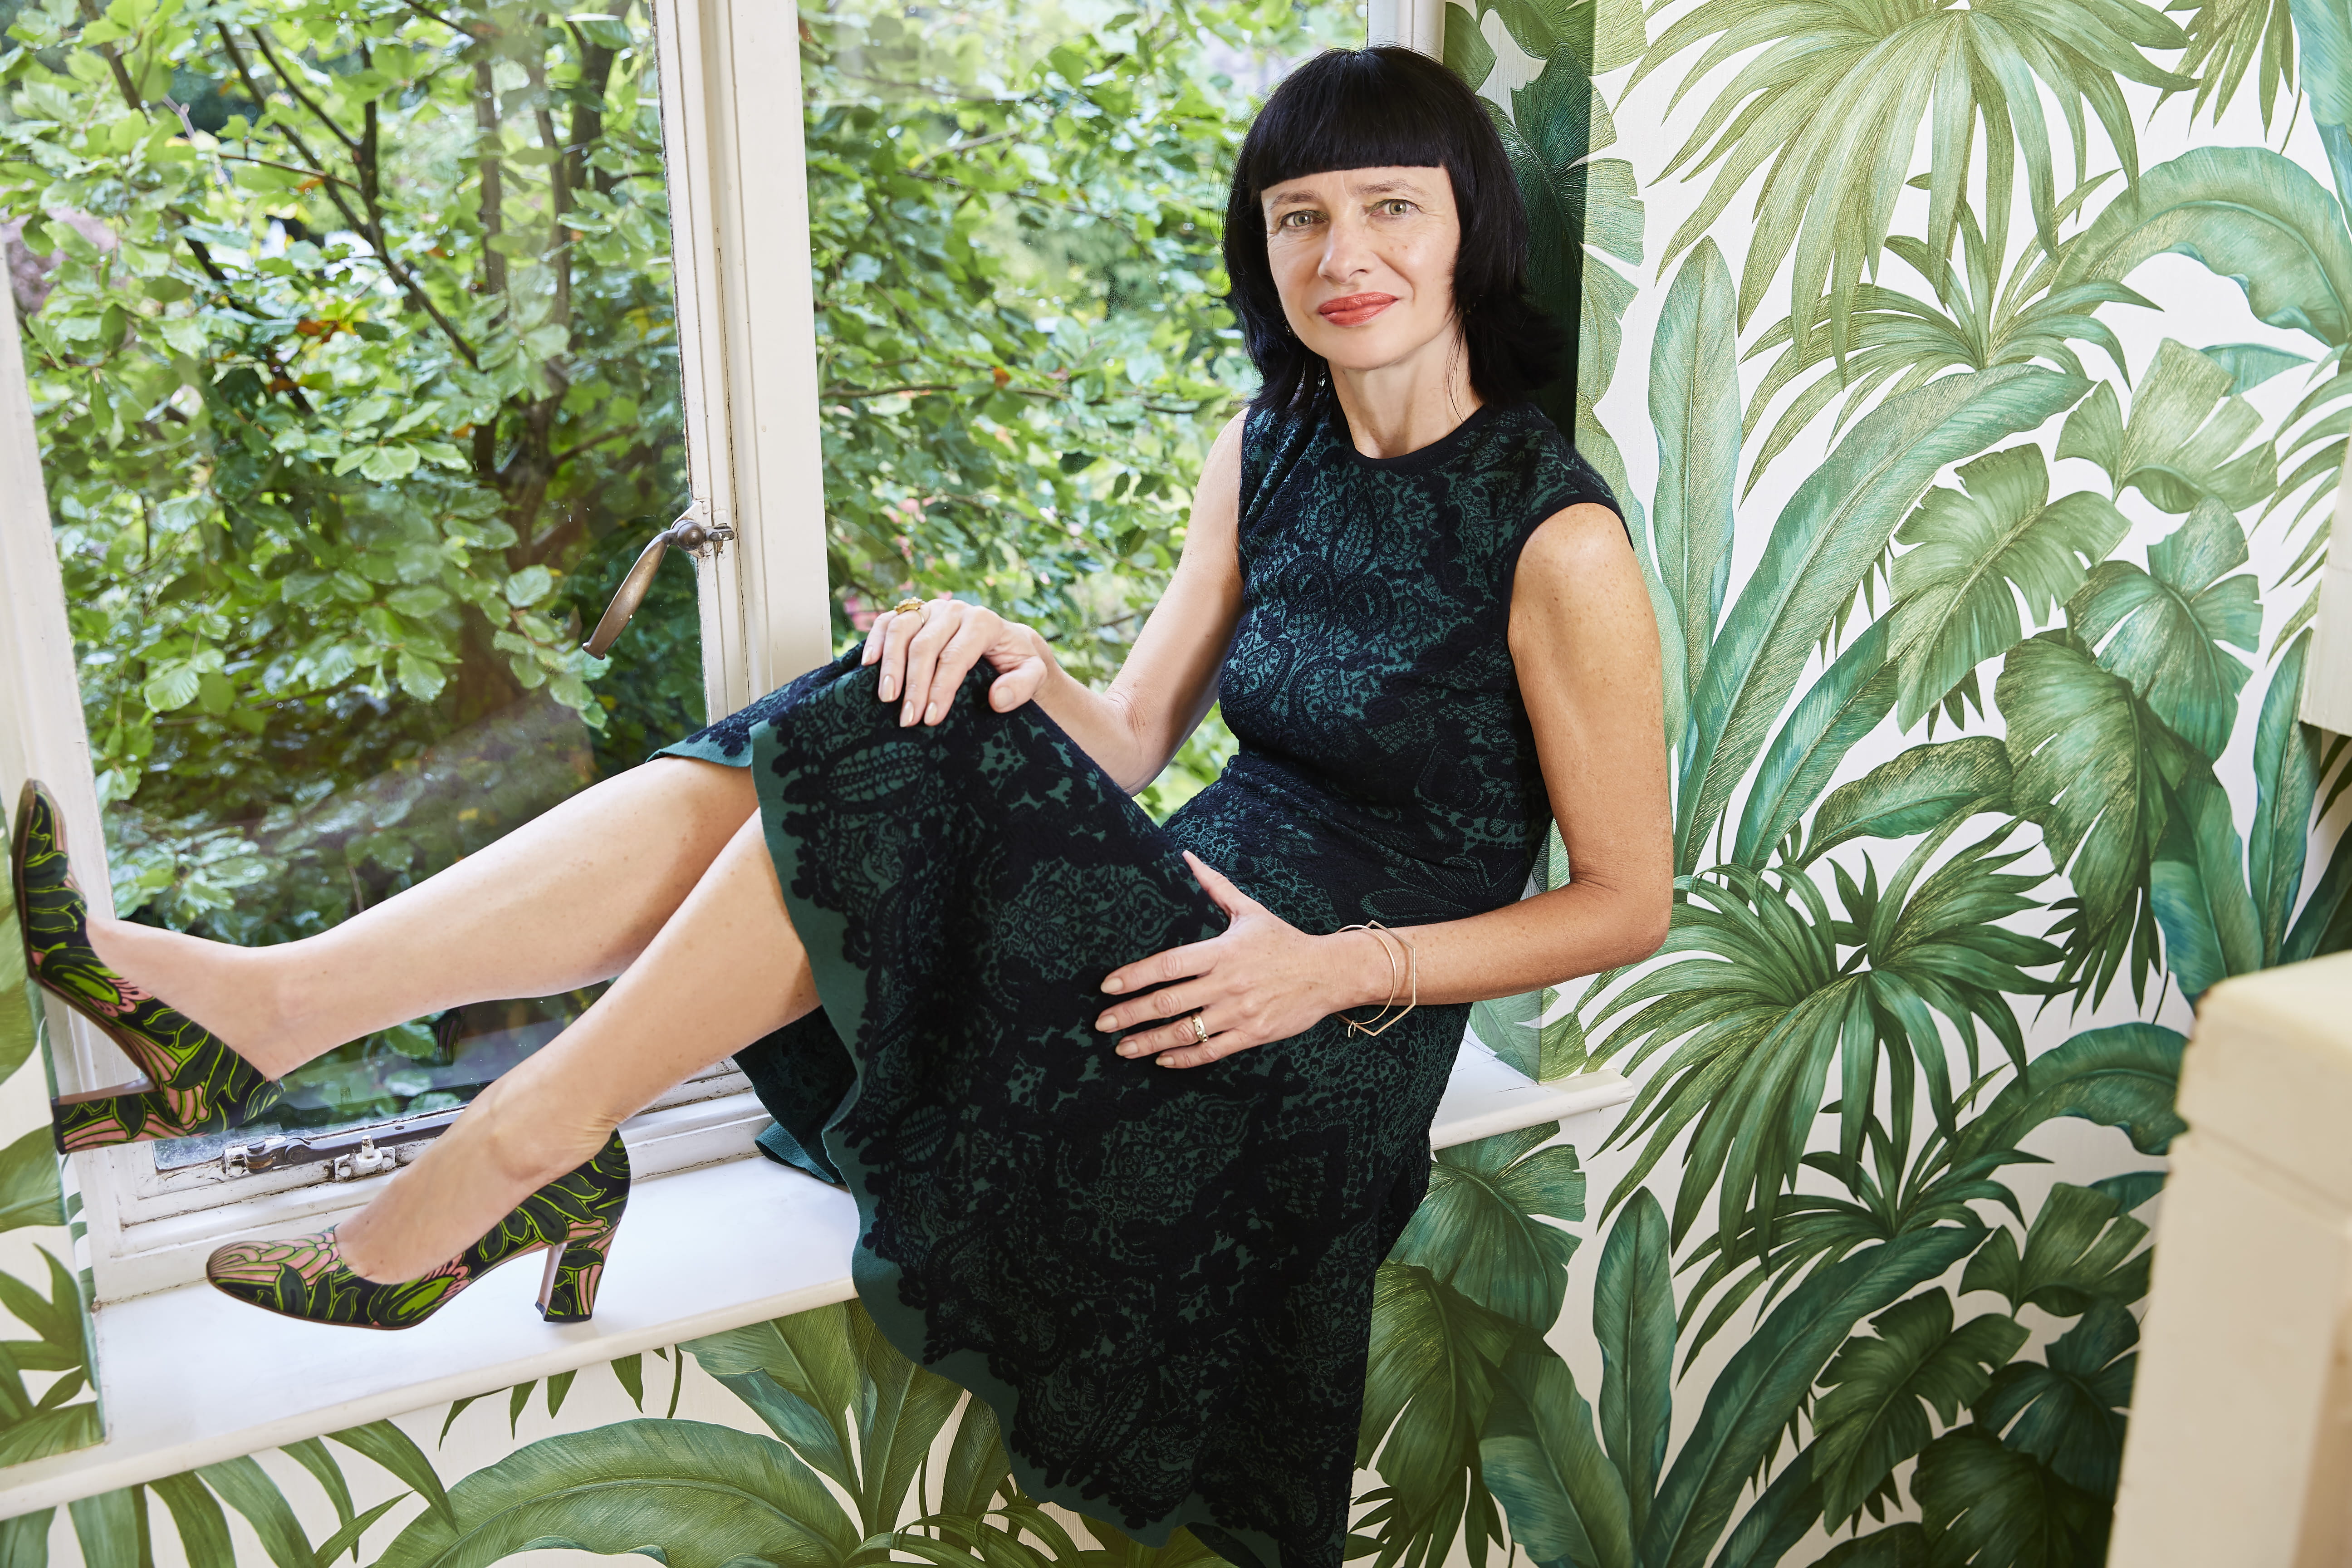 Carry Somers, a woman with dark hair, is sat on a window ledge with a garden visible behind.